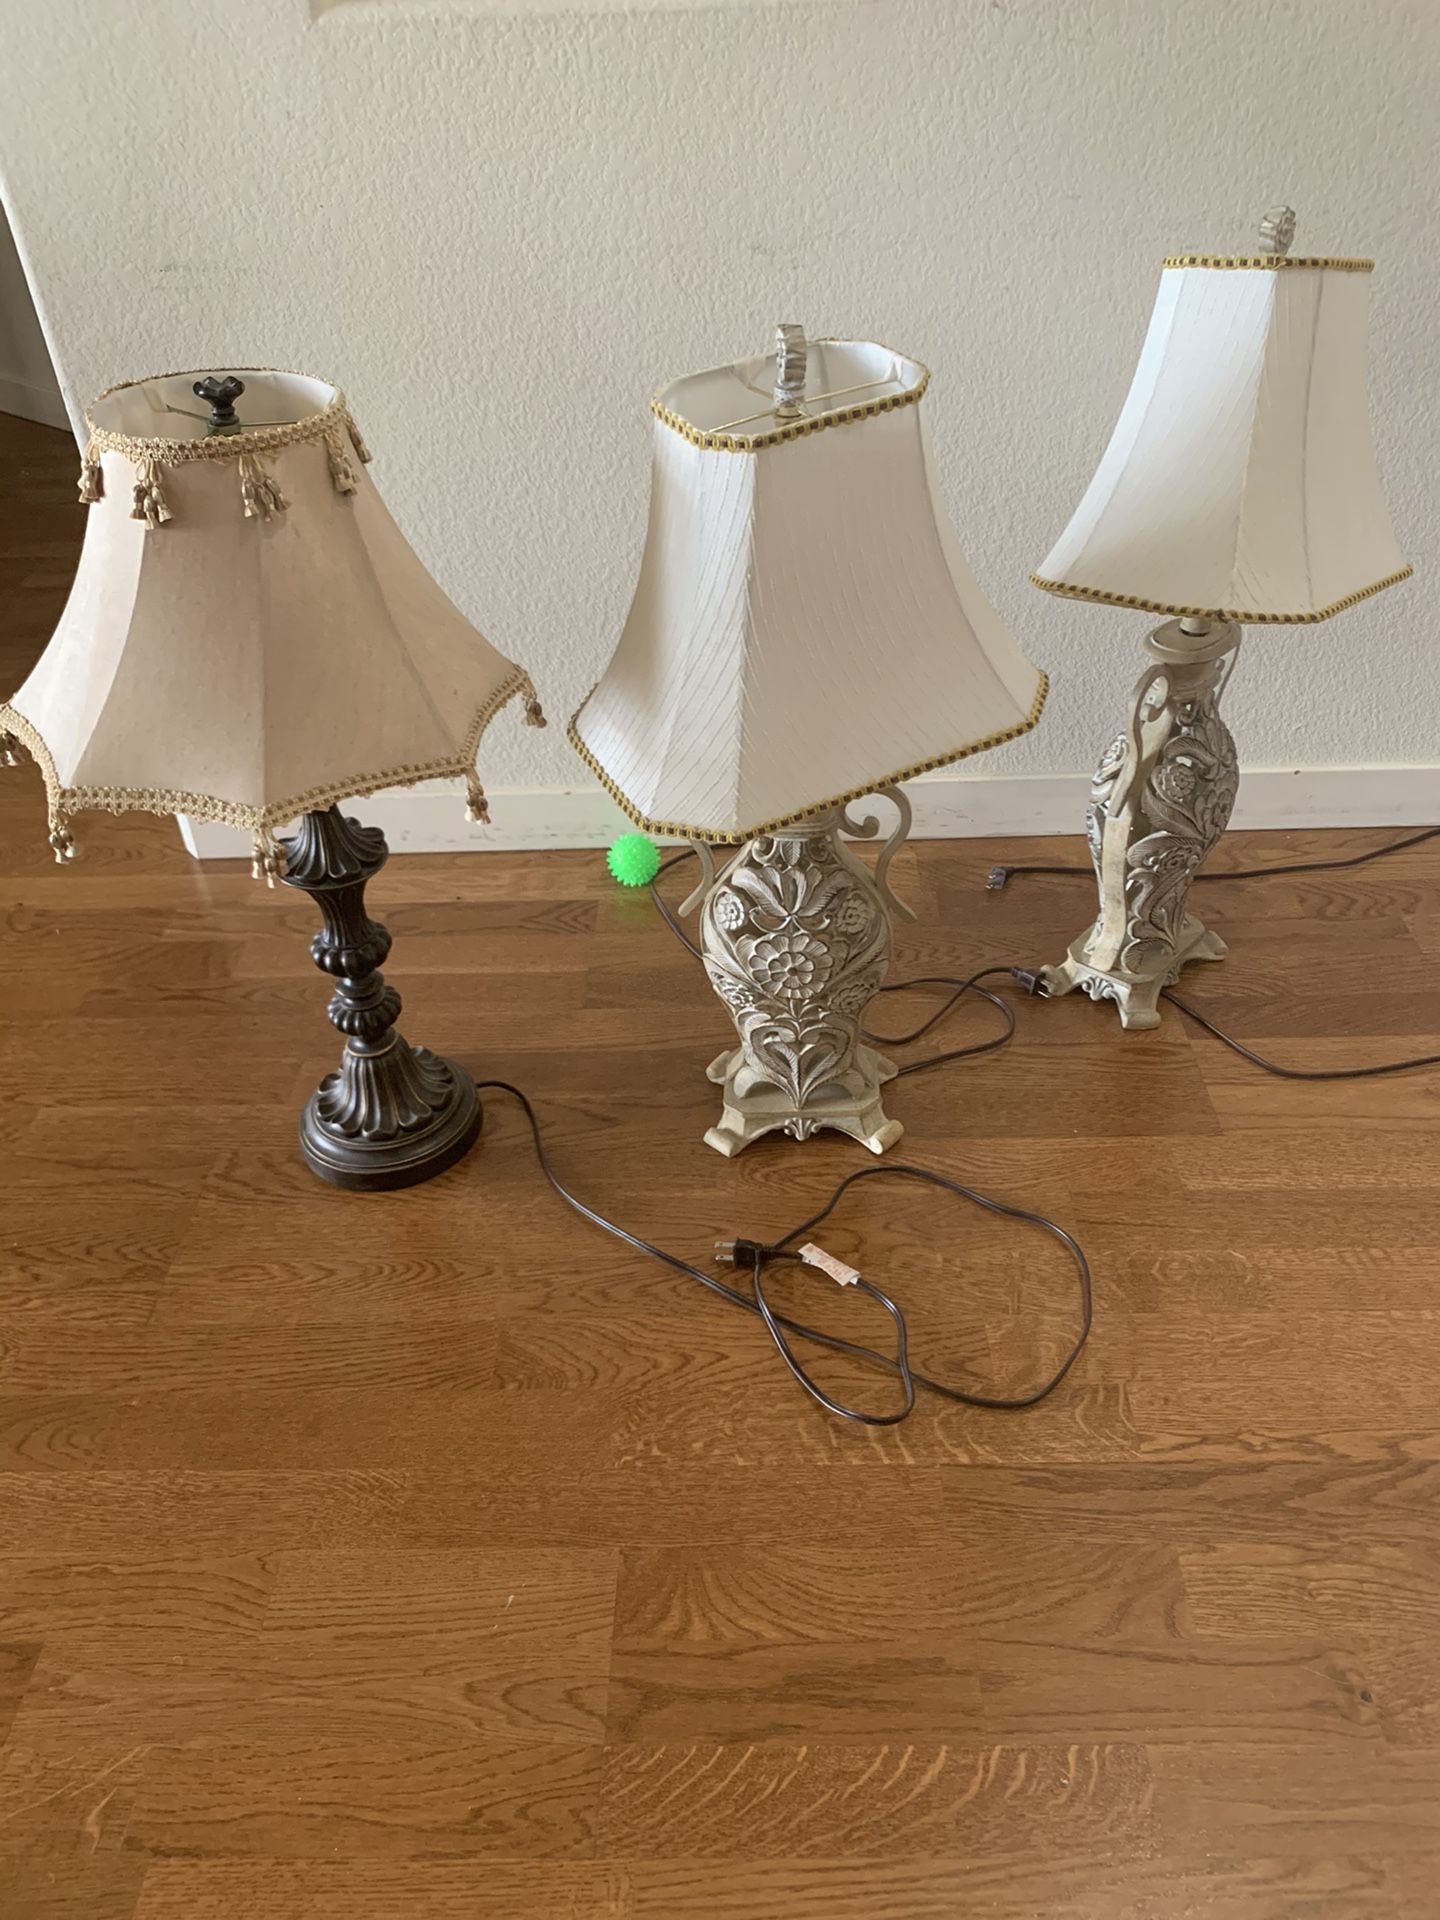 FREE- 3 table lamps. All work